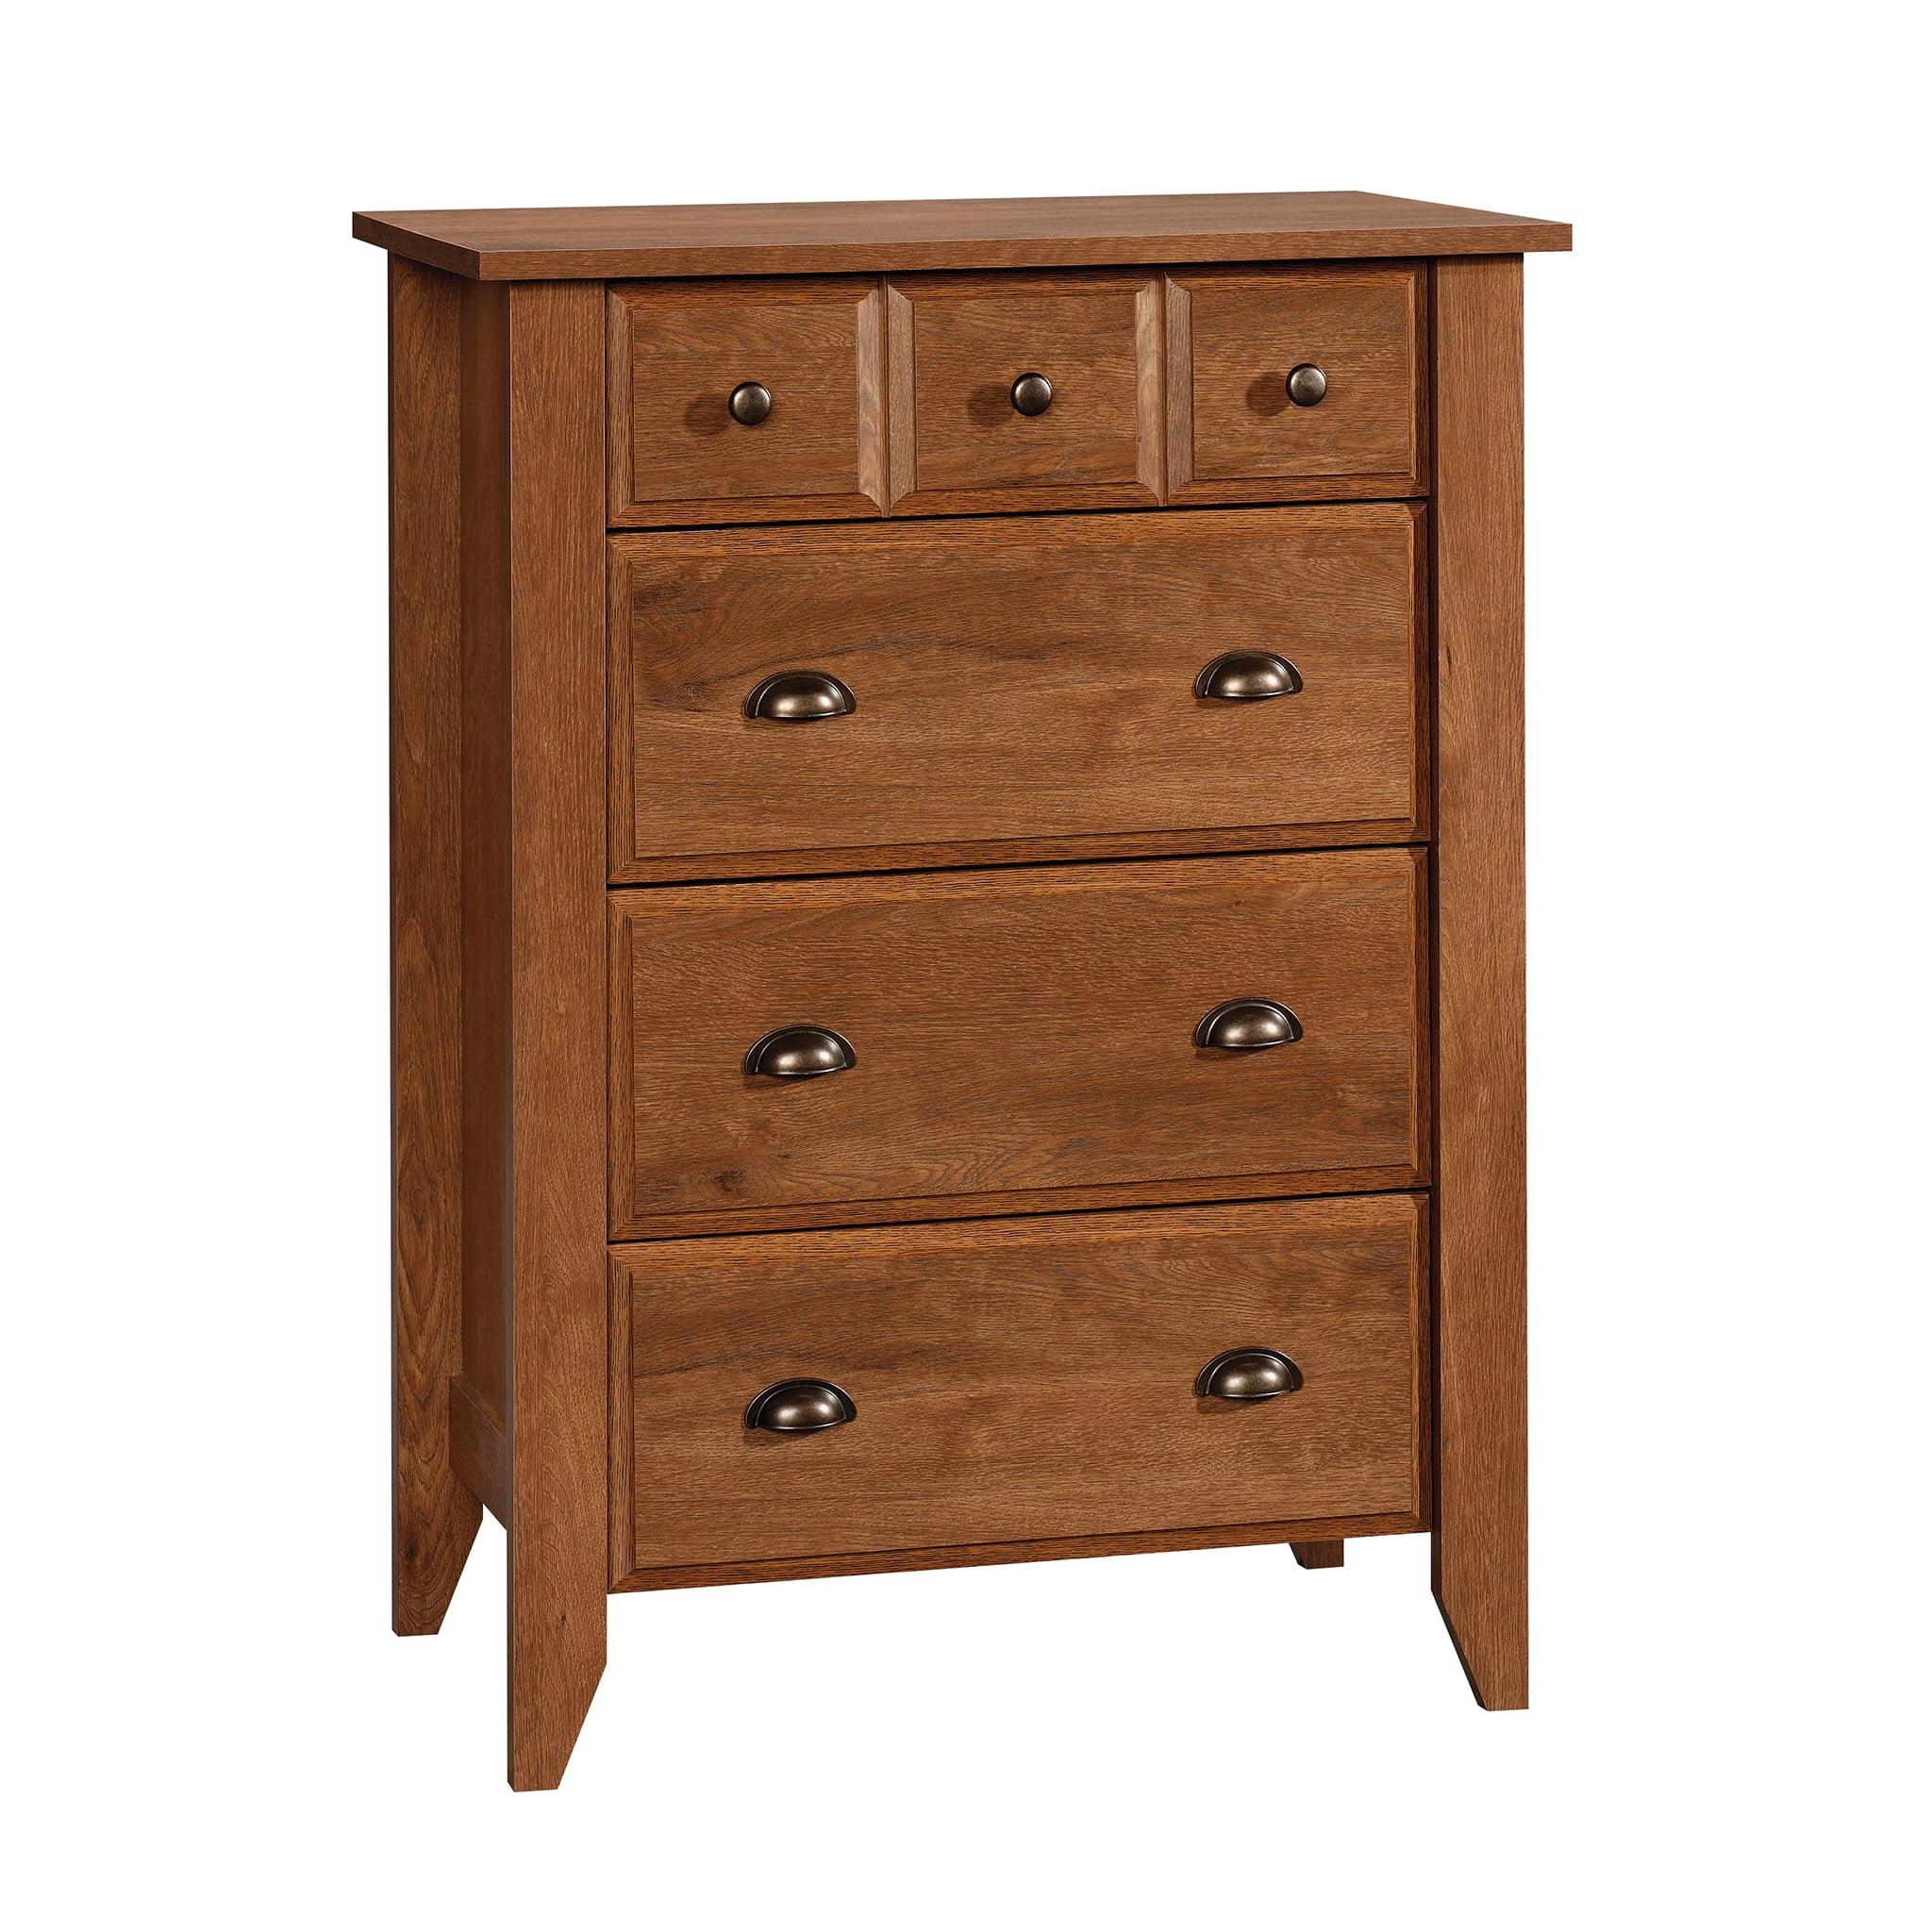 Espresso Country Rustic Freestanding Bedroom Chest with Extra Deep Storage Drawers